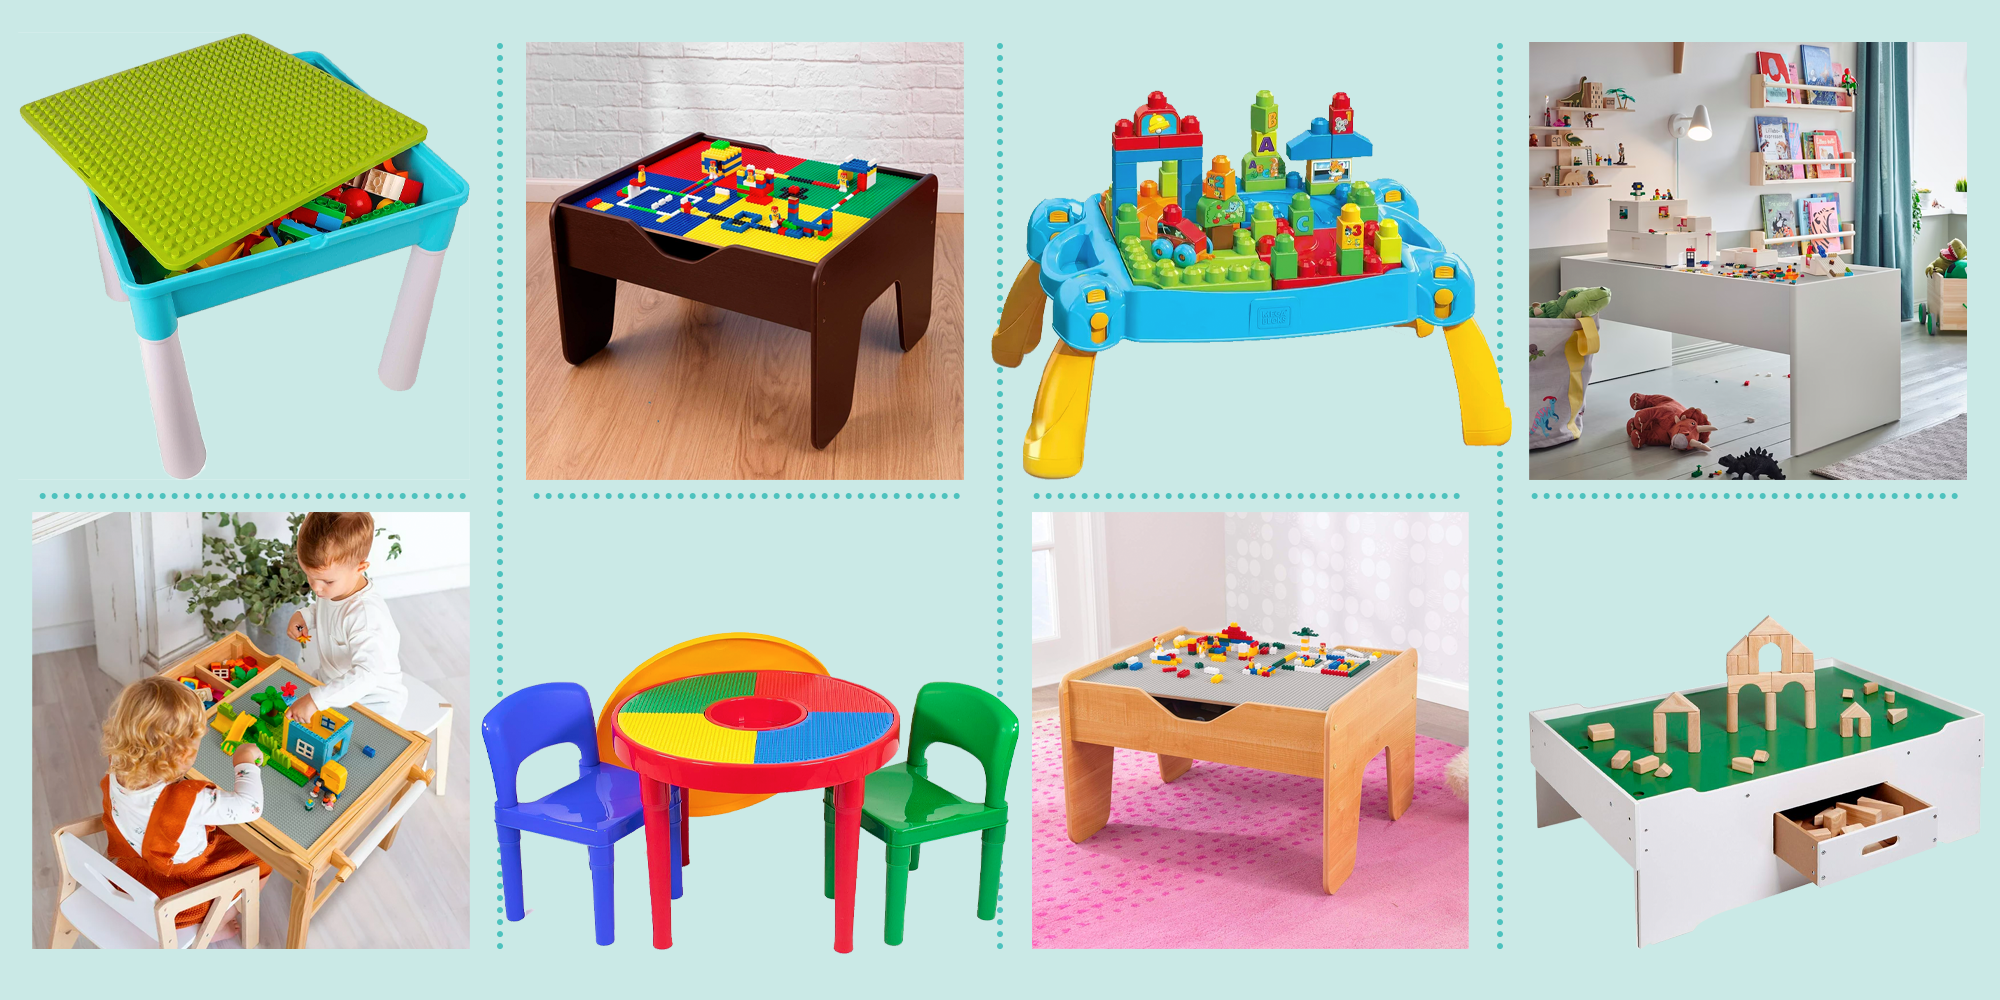 Round Lego Table with storage brick container and 4 chairs - KinderSpell ®